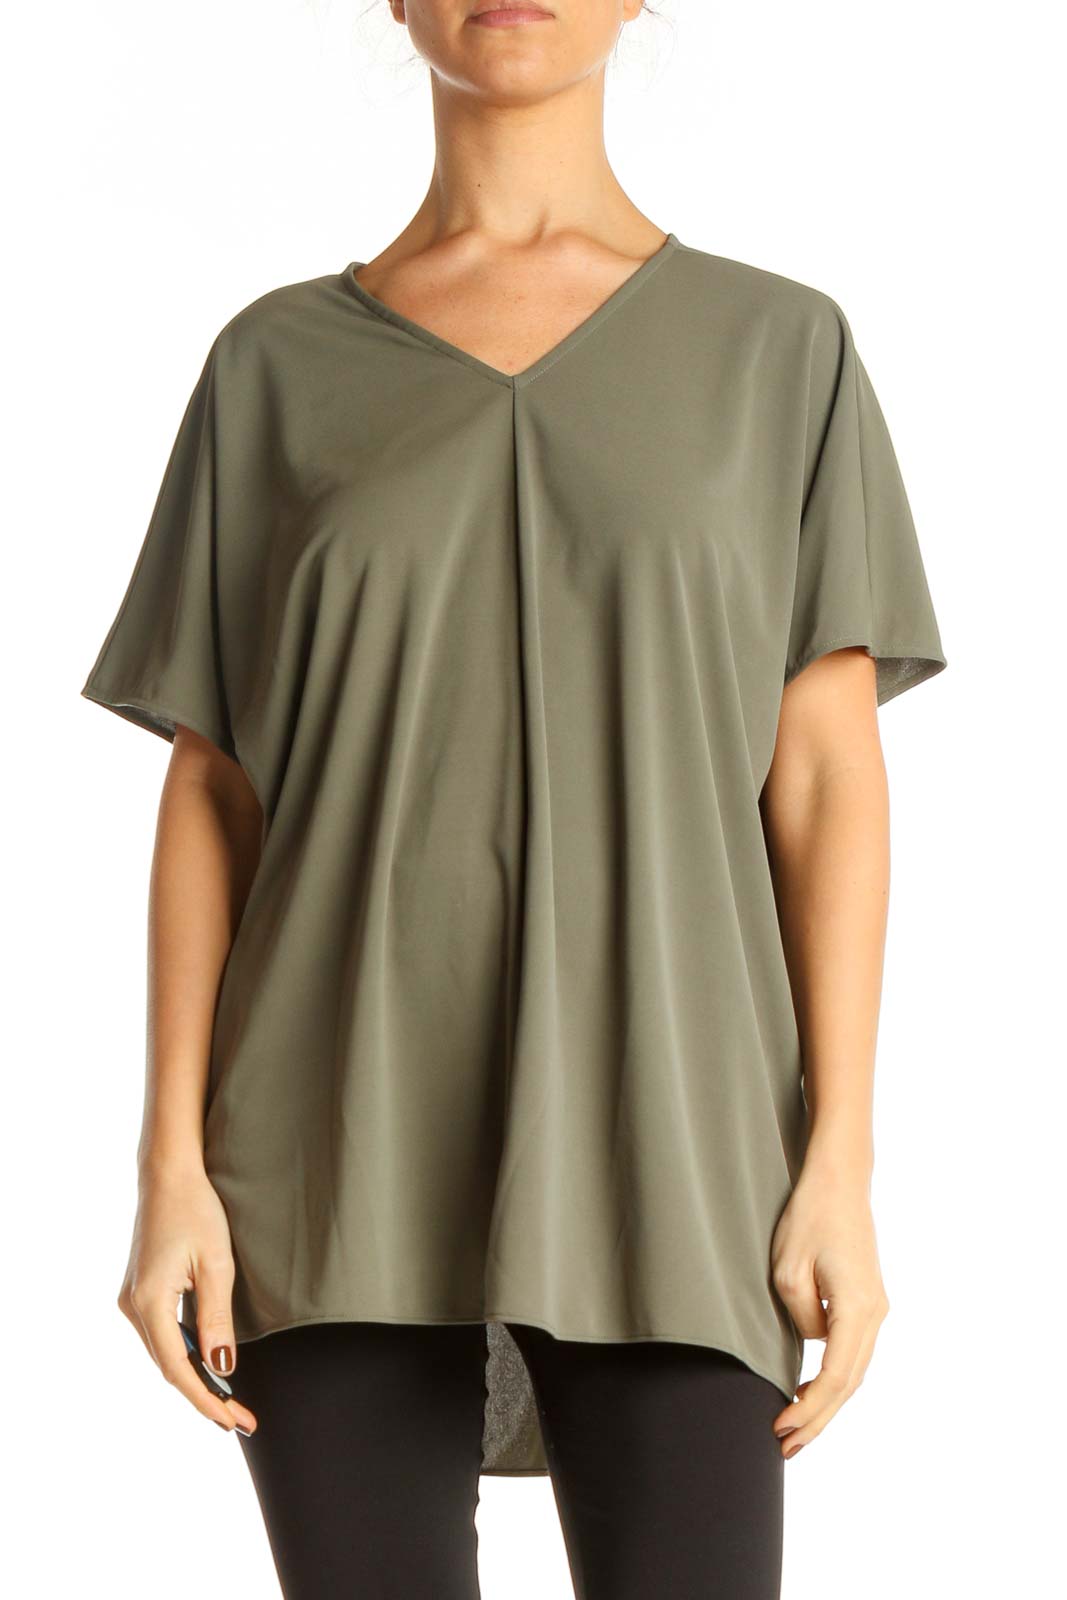 Green Solid Casual Blouse Front